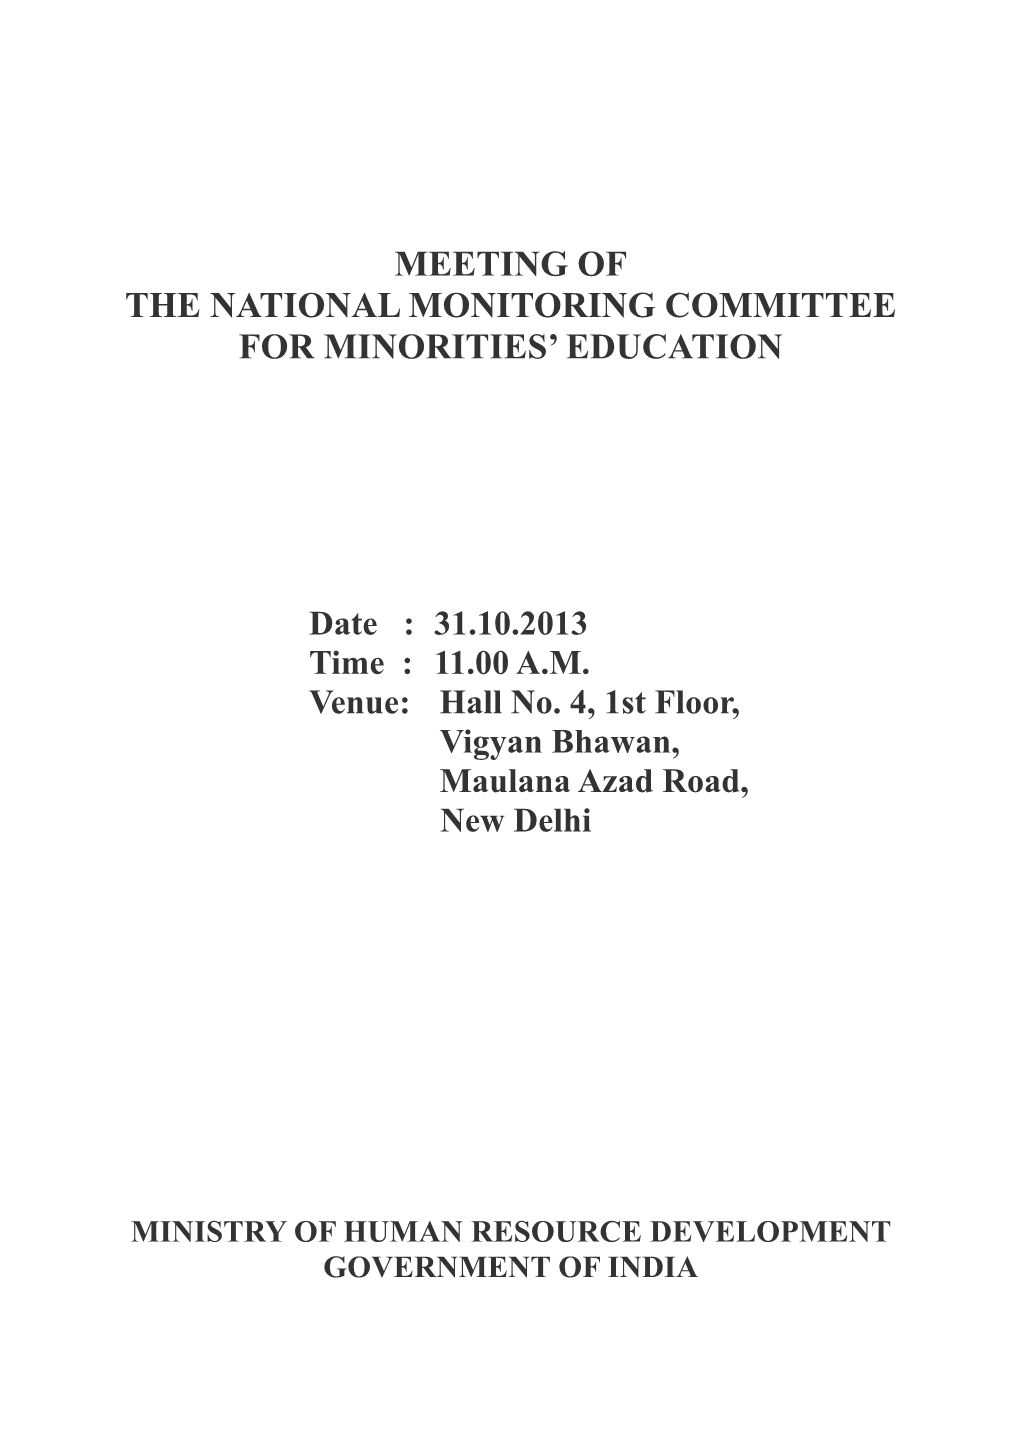 Meeting of the National Monitoring Committee for Minorities’ Education